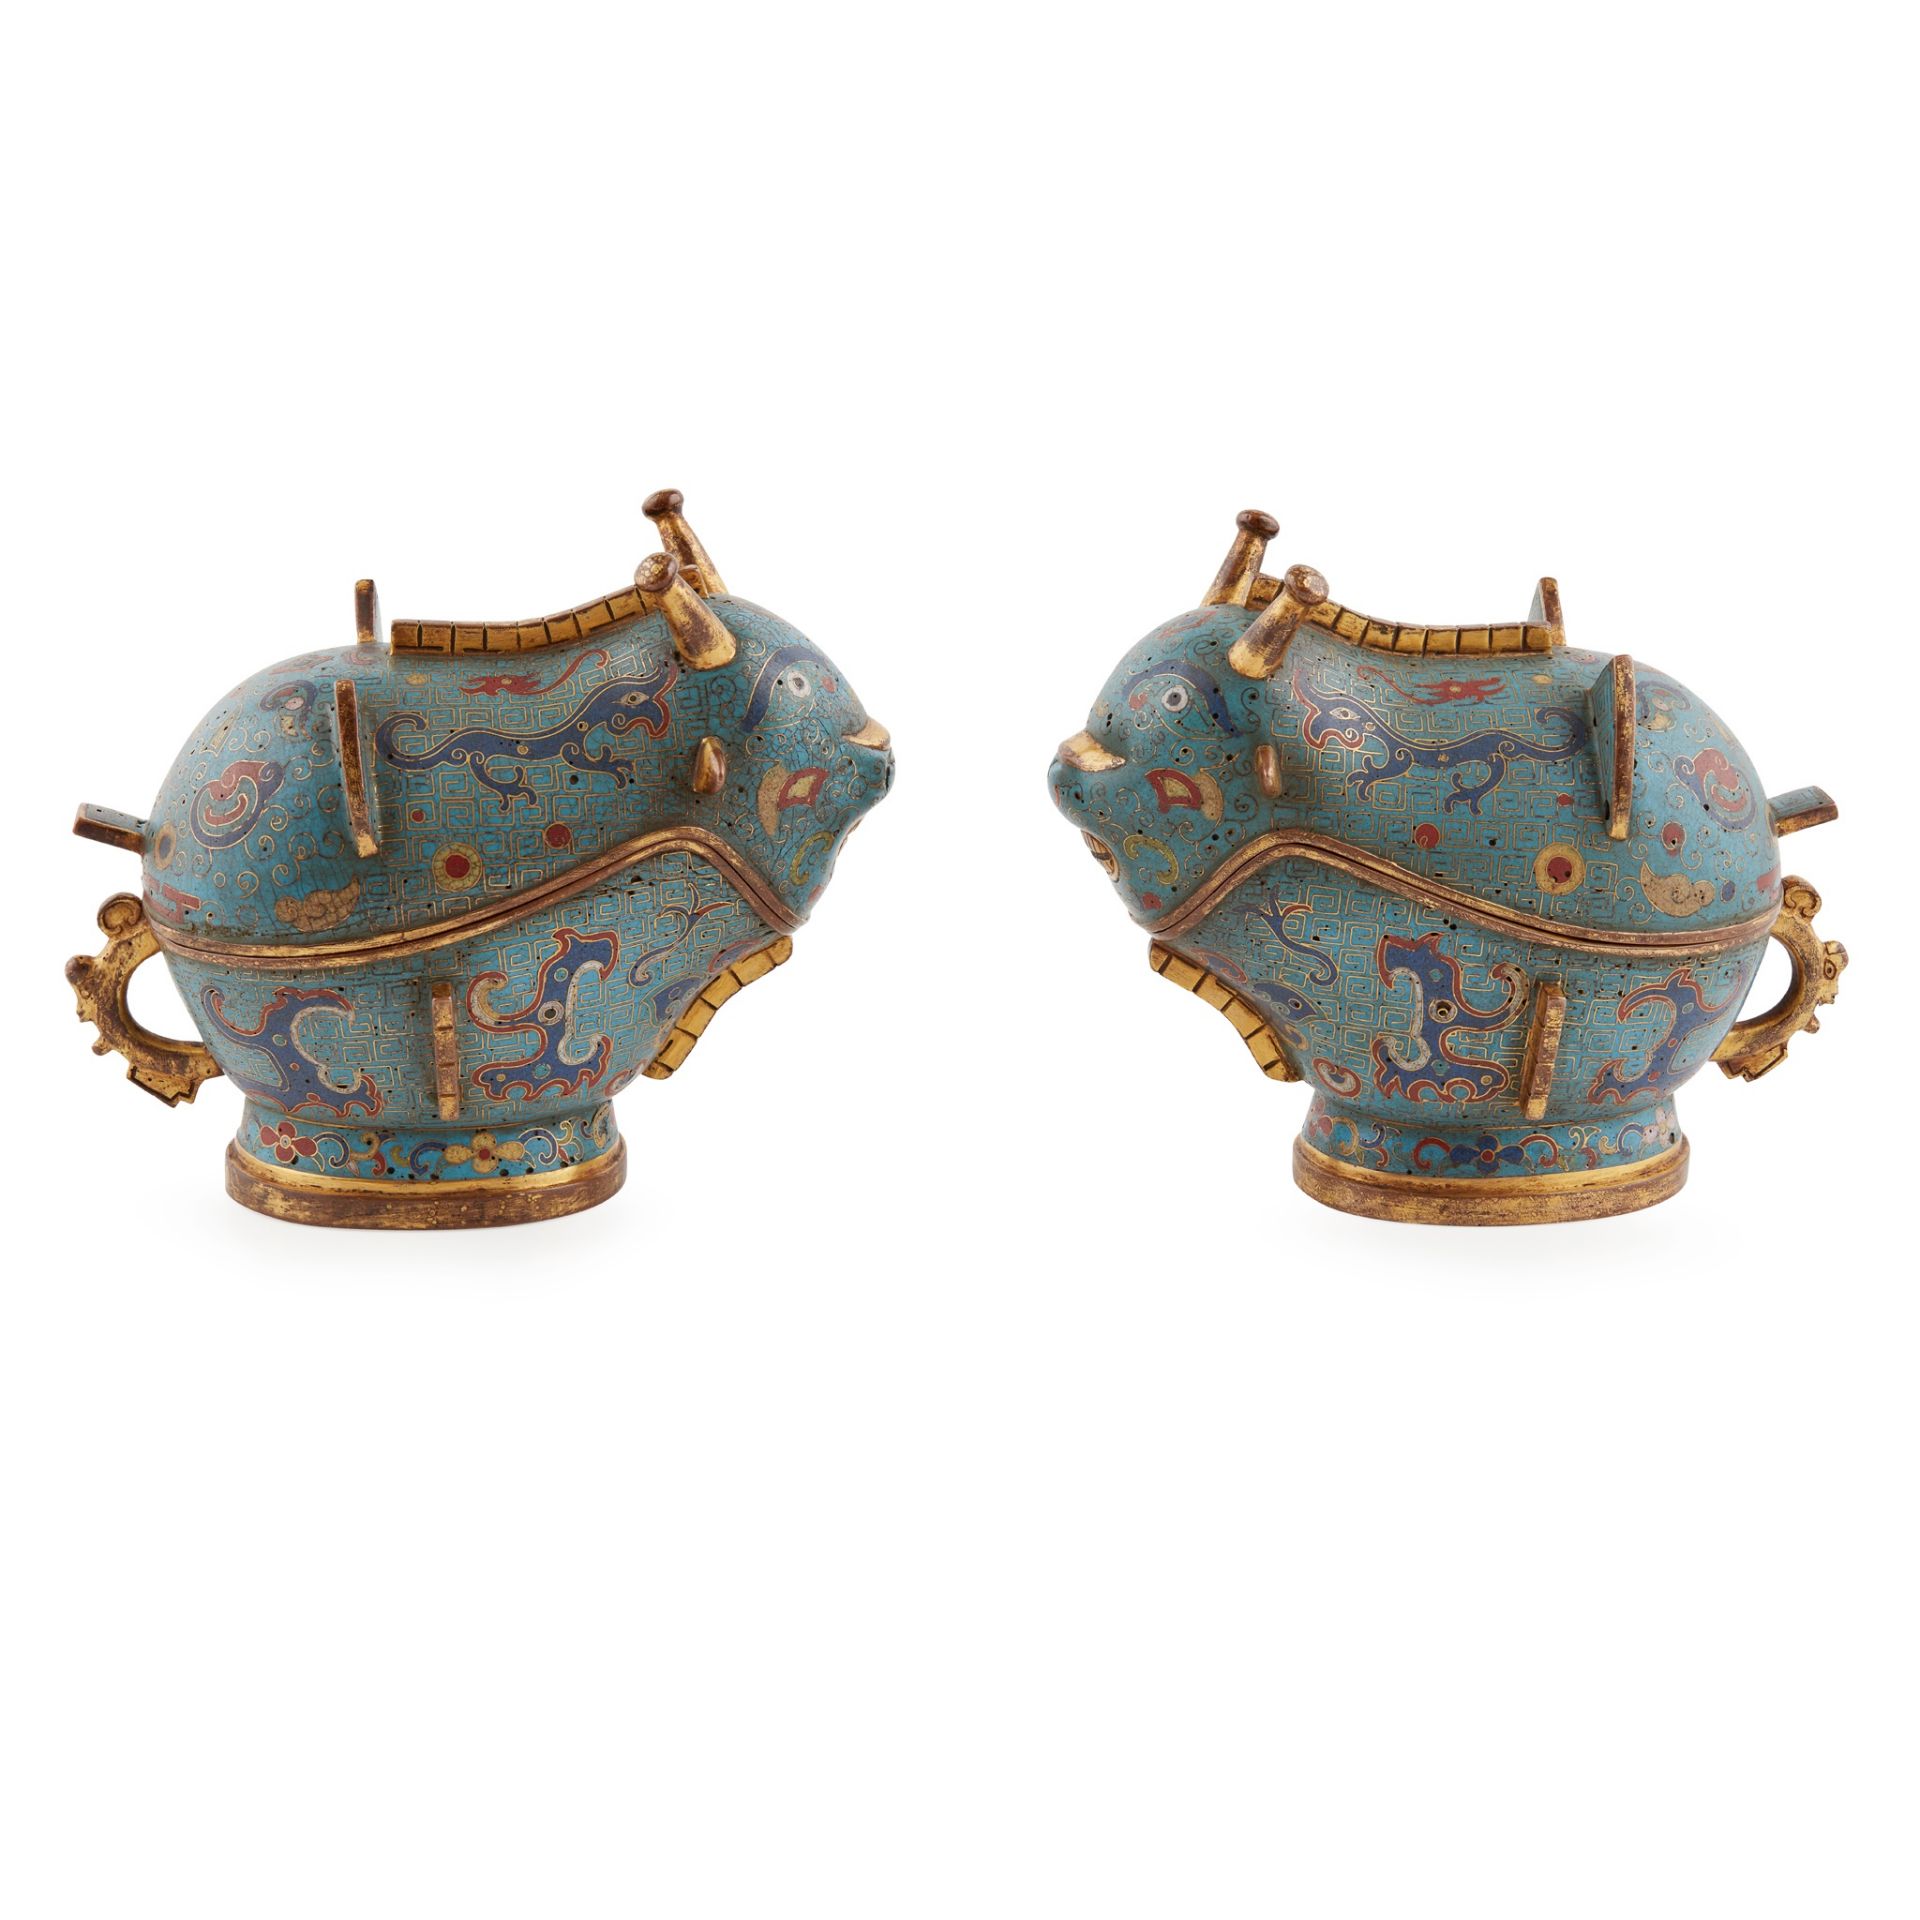 PAIR OF CLOISONNÉ ENAMEL WINE VESSELS AND COVERS, GONG QIANLONG MARK BUT 19TH CENTURY - Image 2 of 3